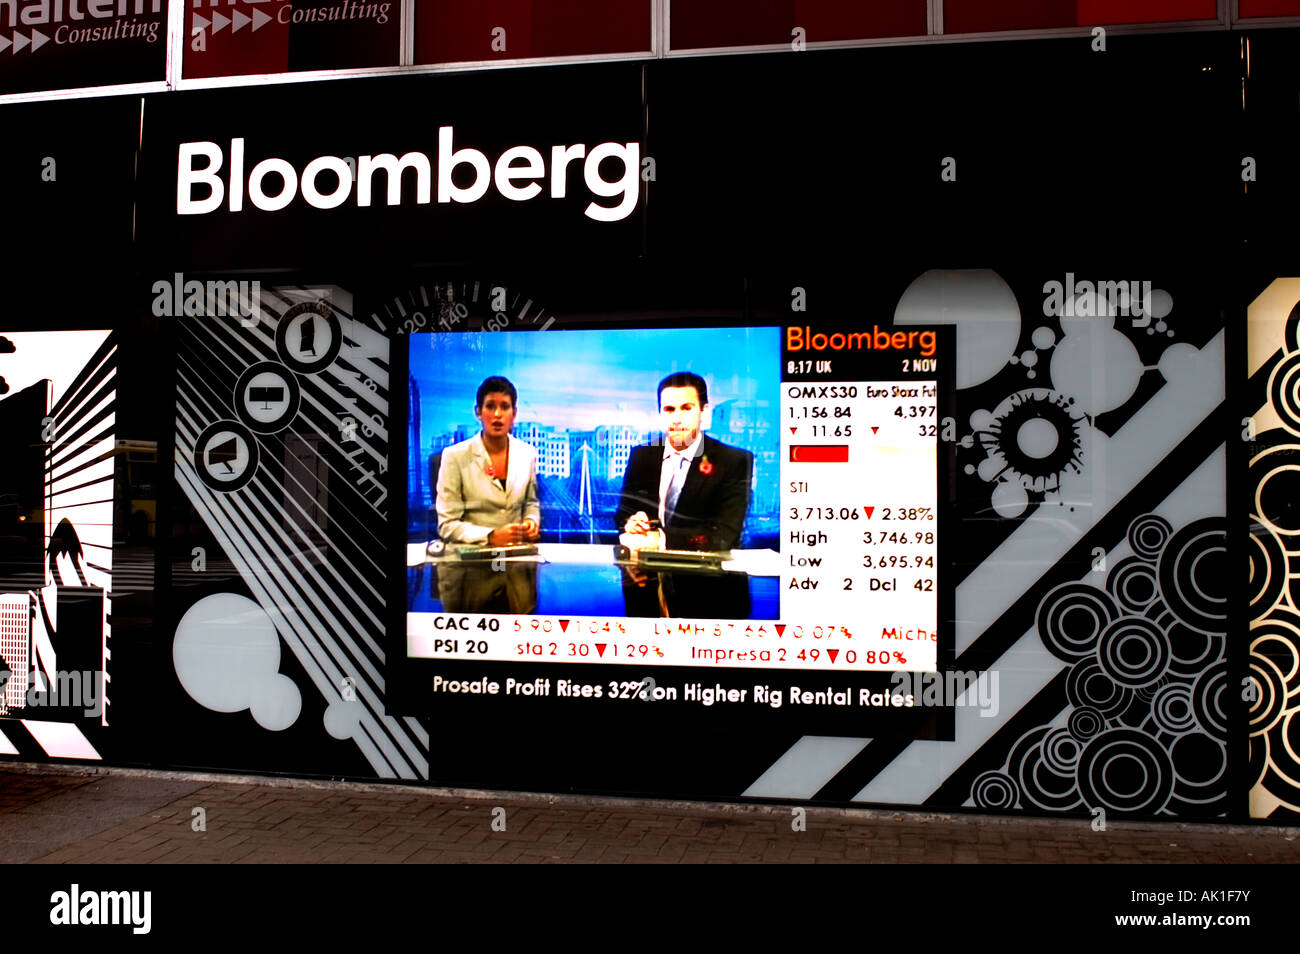 Bloomberg business channel banking stock market Stock Photo